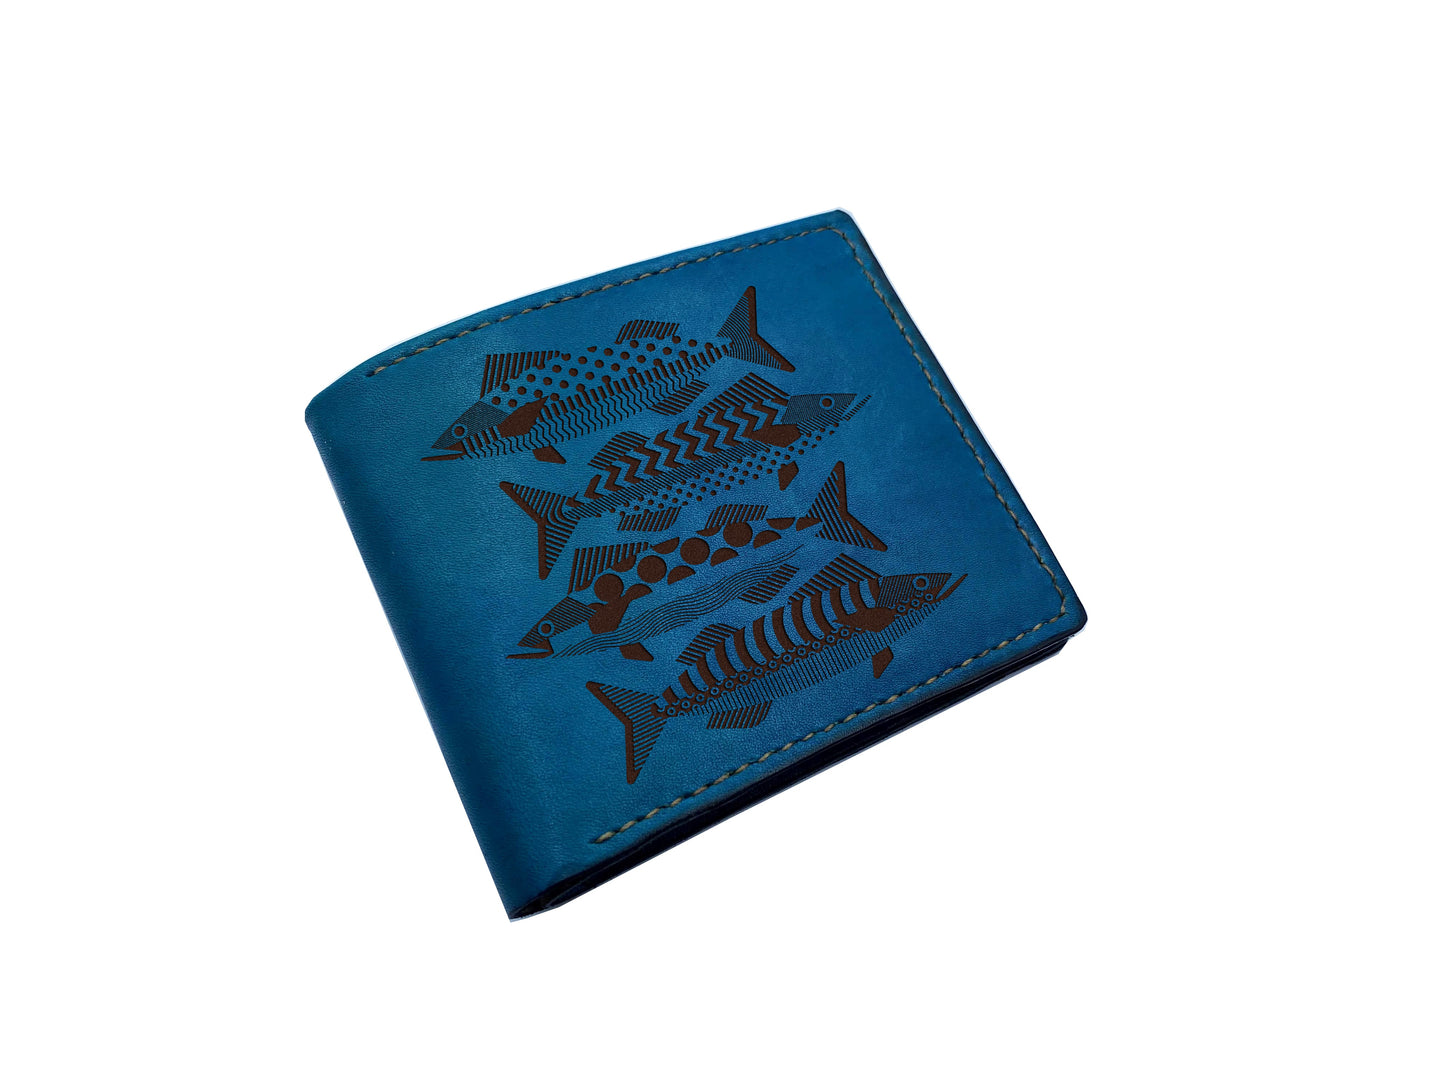 Fish pattern leather men's wallet, bifold ID card wallet, mini wallet with name engrave